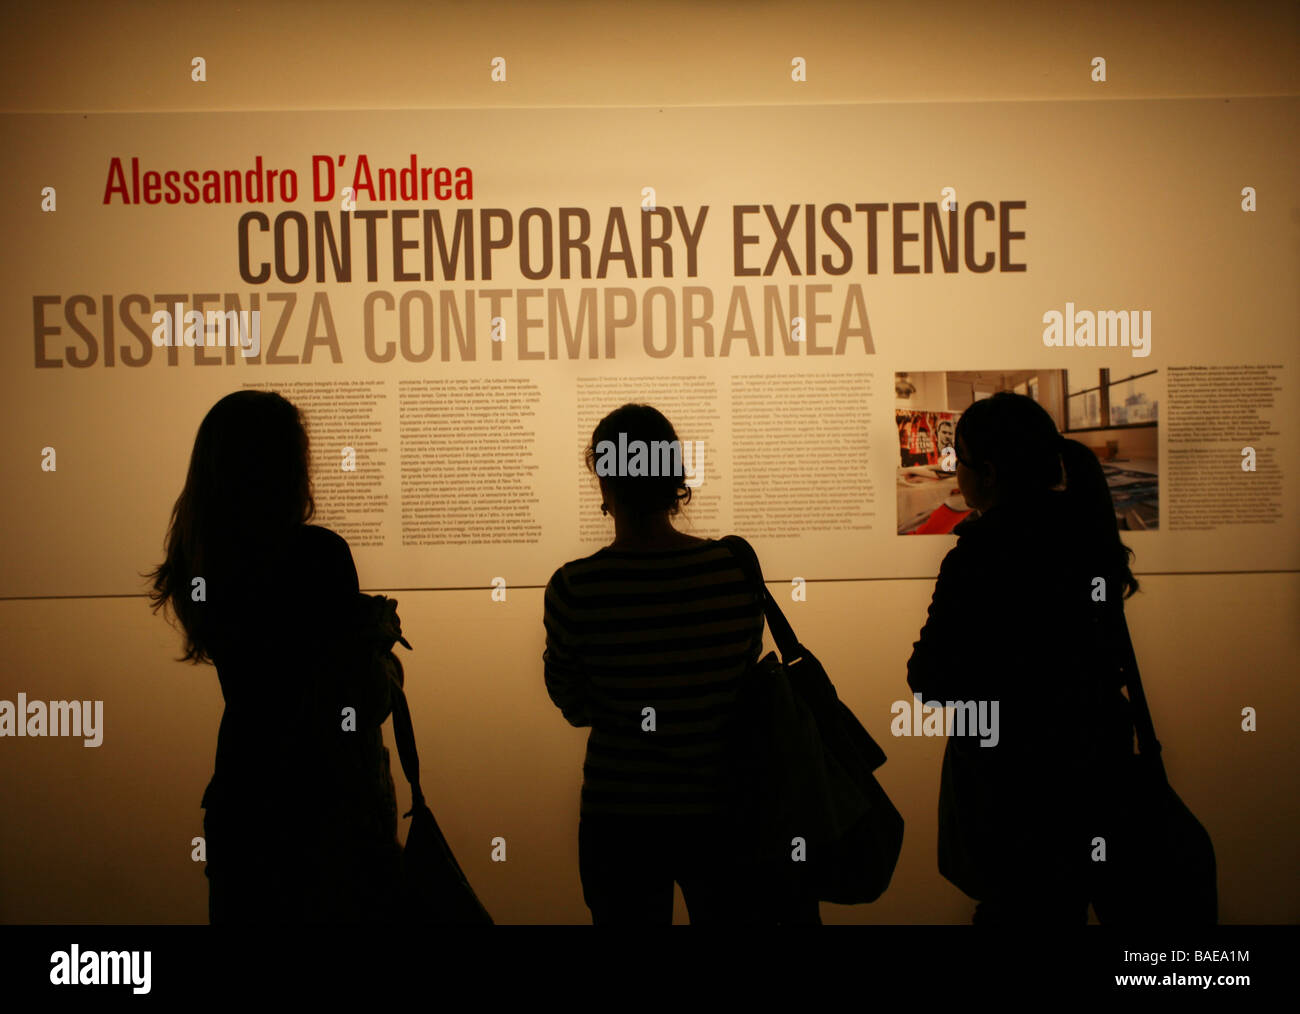 Triennale Design Museum, Contemporary Existence, Alessandro D'Andrea, Milan, Lombardy, Italy Stock Photo